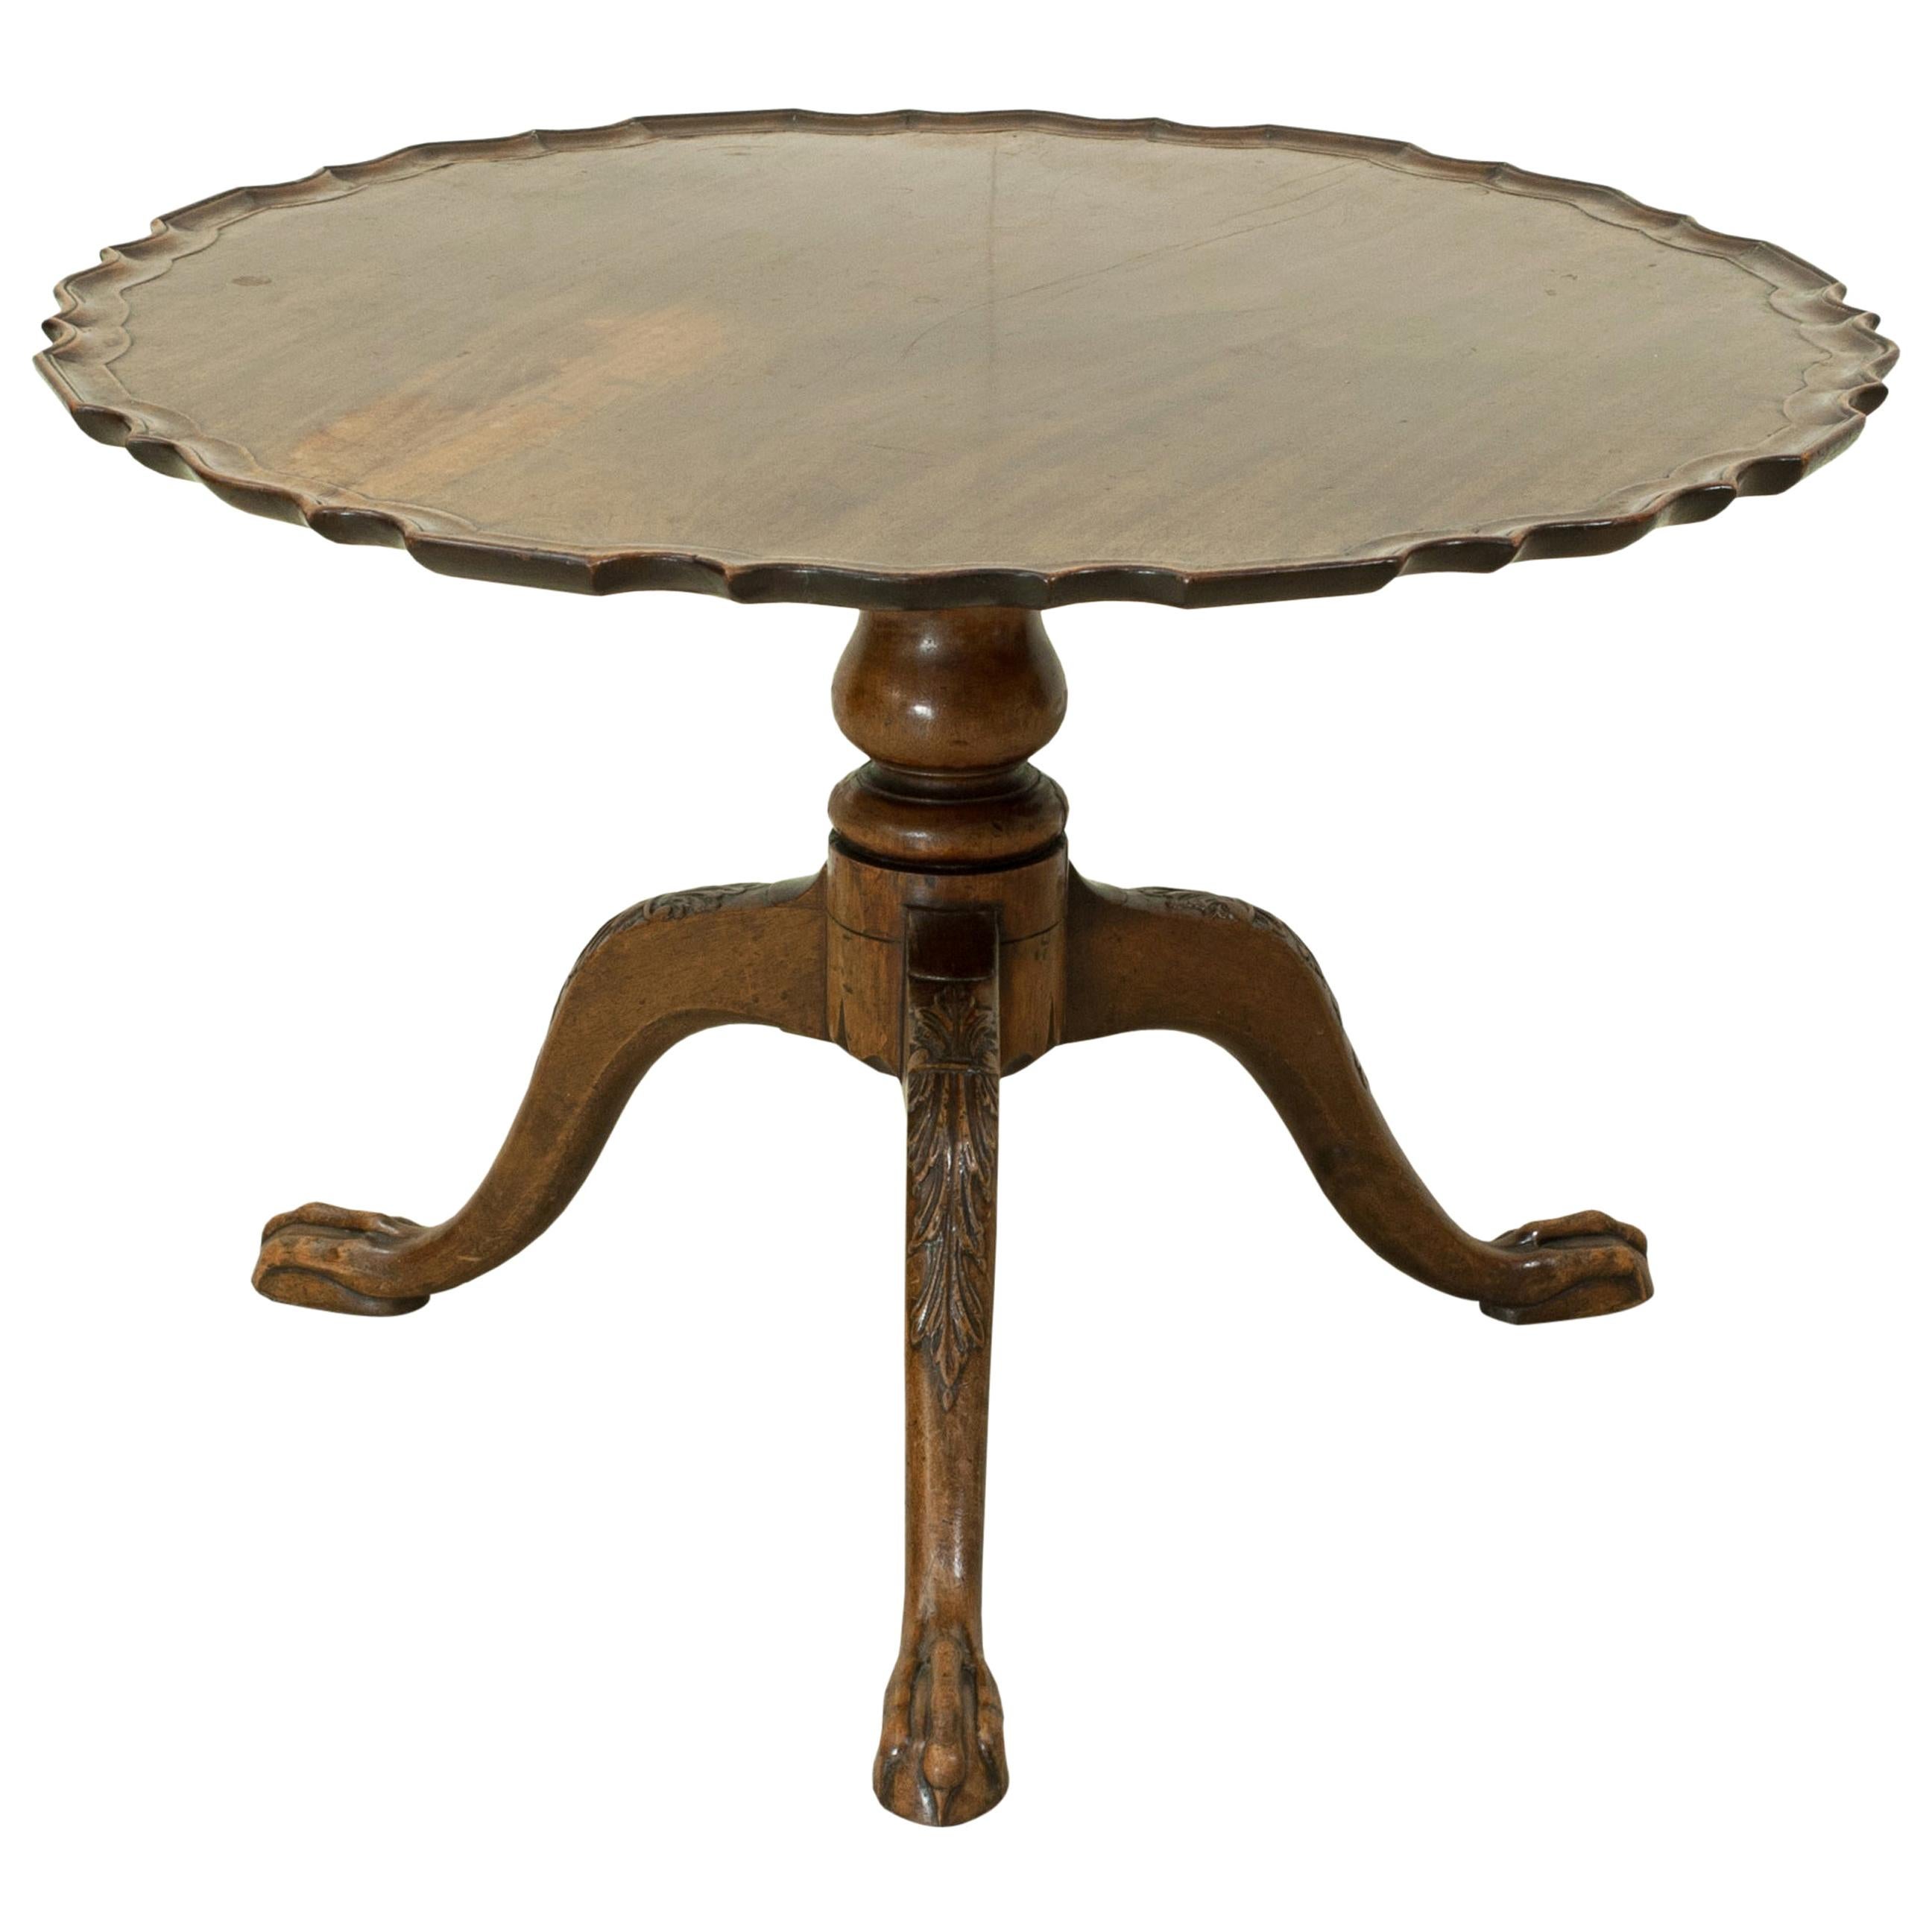 Mahogany Coffee, Pie Crust Tripod Table with Tilt-Top Action